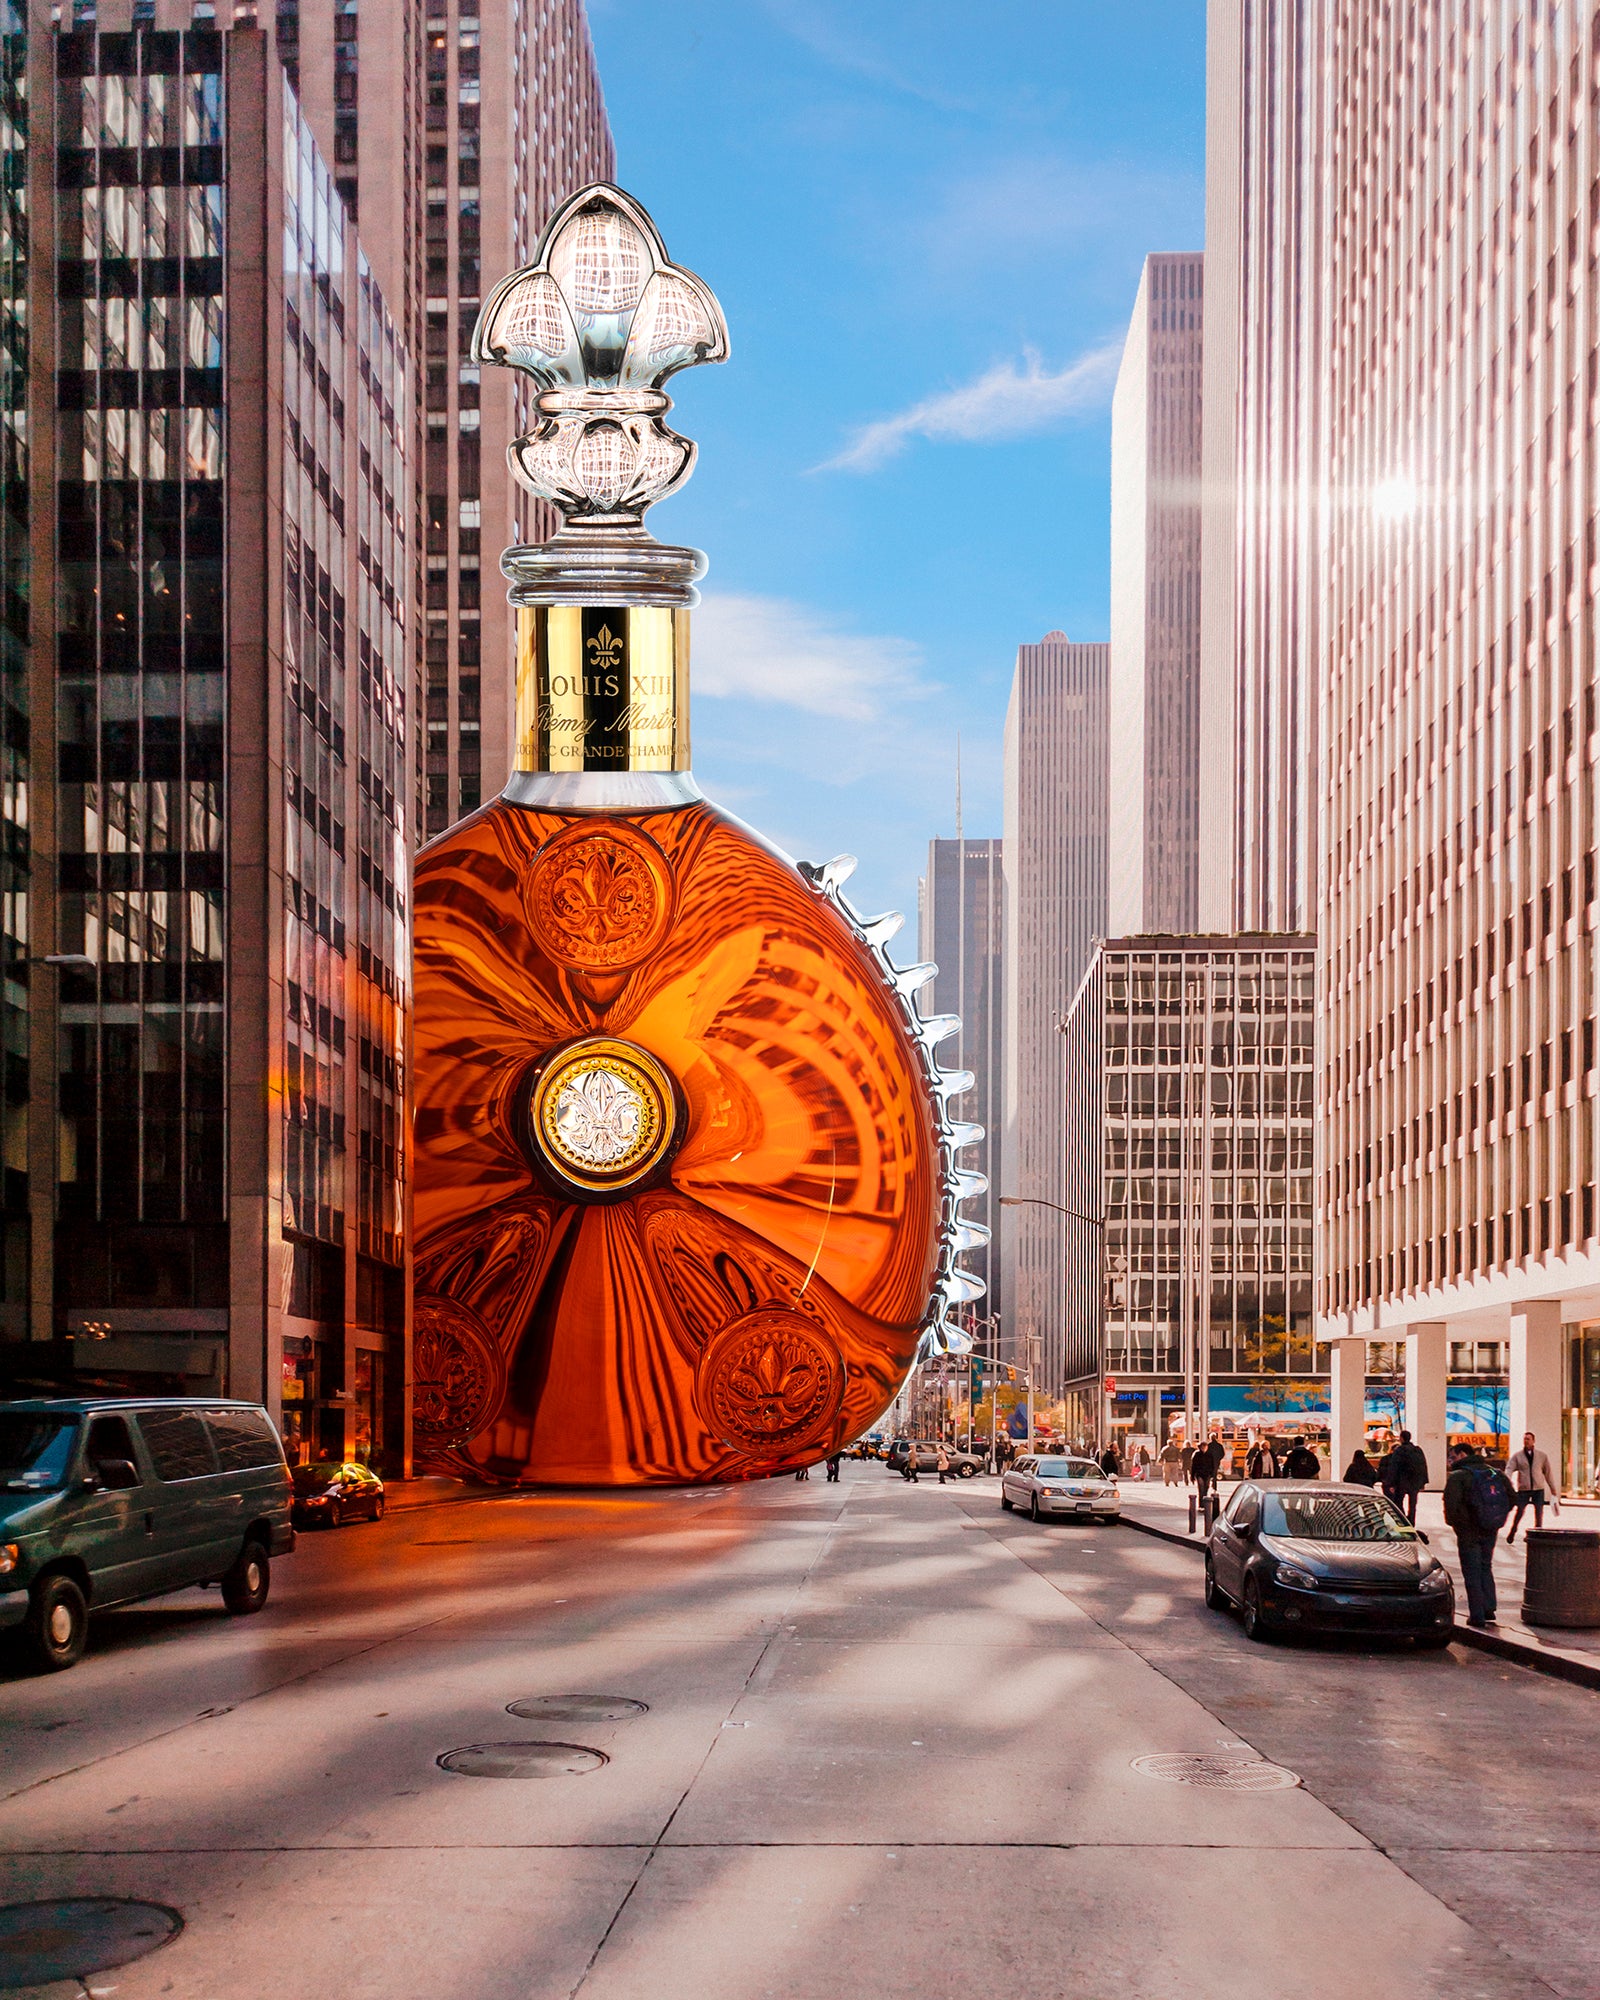 A lifestyle photo of LOUIS XIII decanter among buildings of New York City